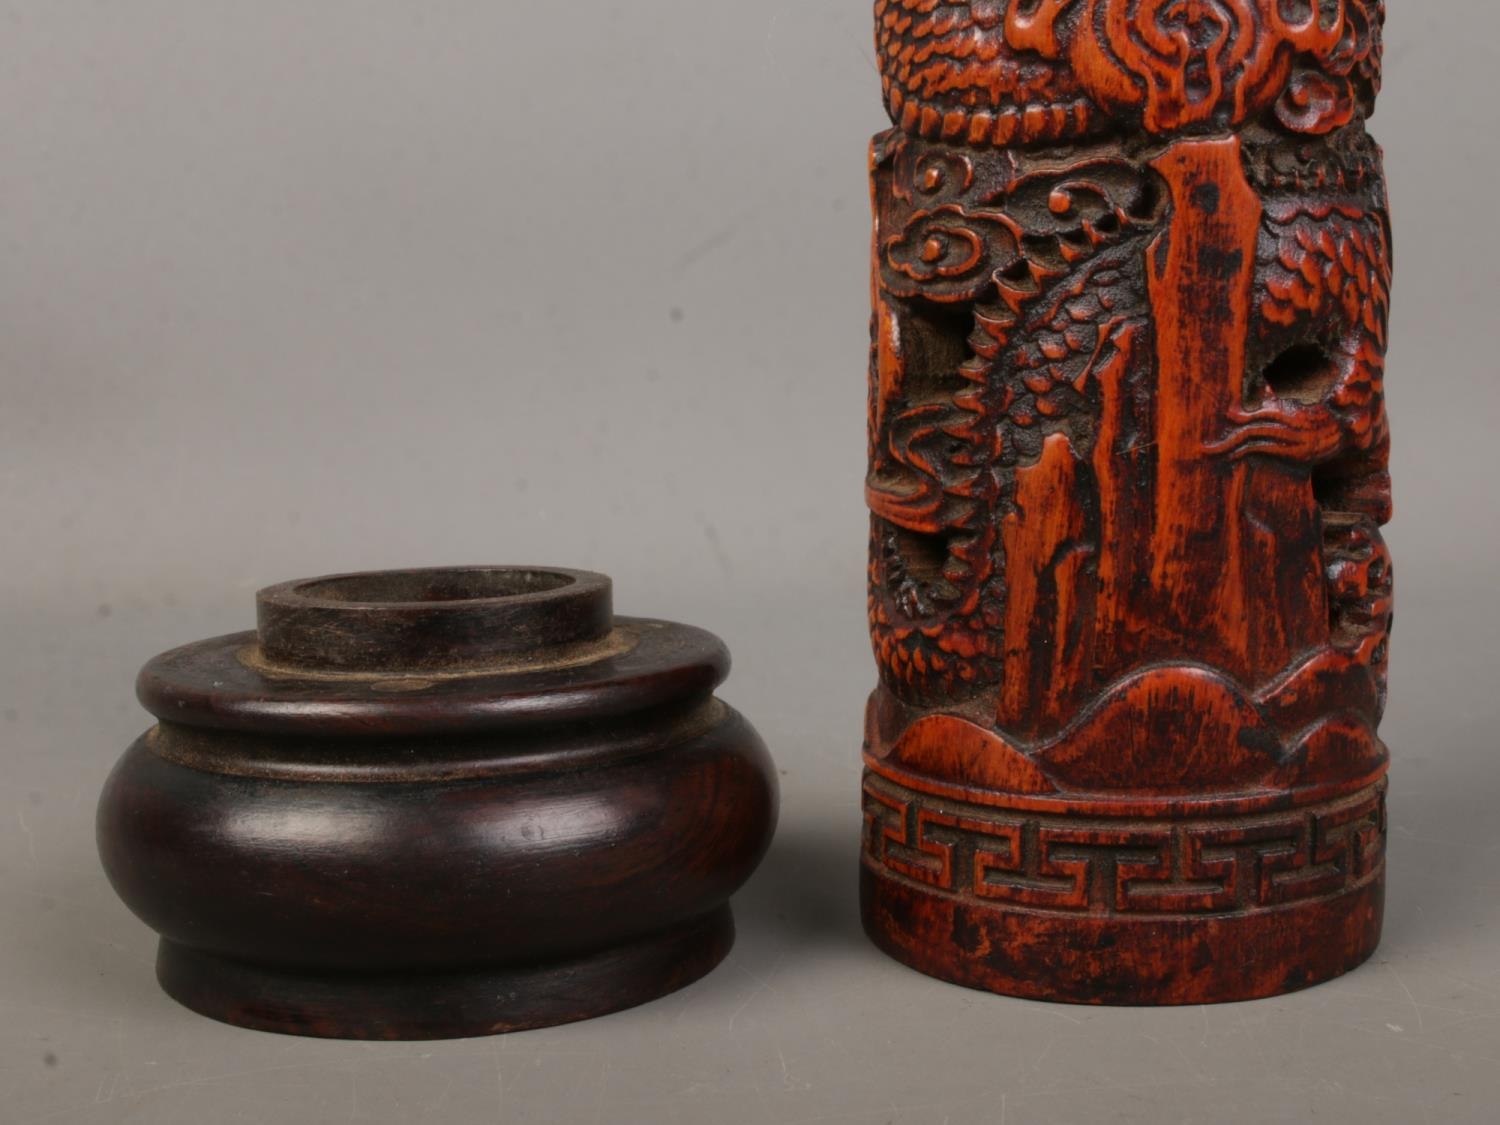 A Chinese wooden incense holder with carved decoration depicting dragons. Height 25cm. - Image 3 of 4